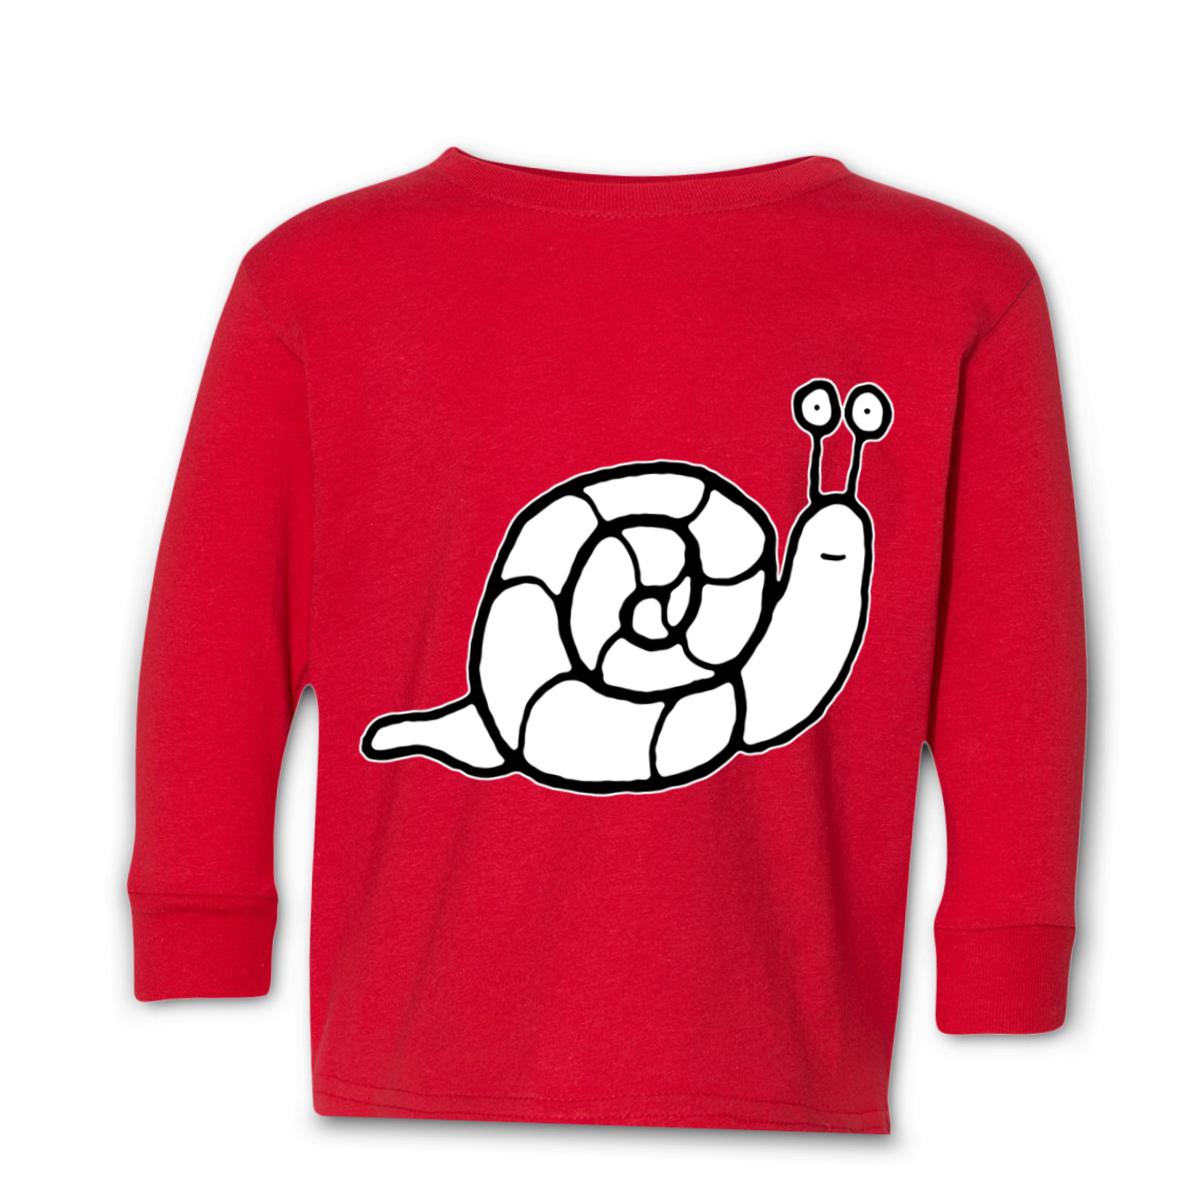 Snail Toddler Long Sleeve Tee 2T red